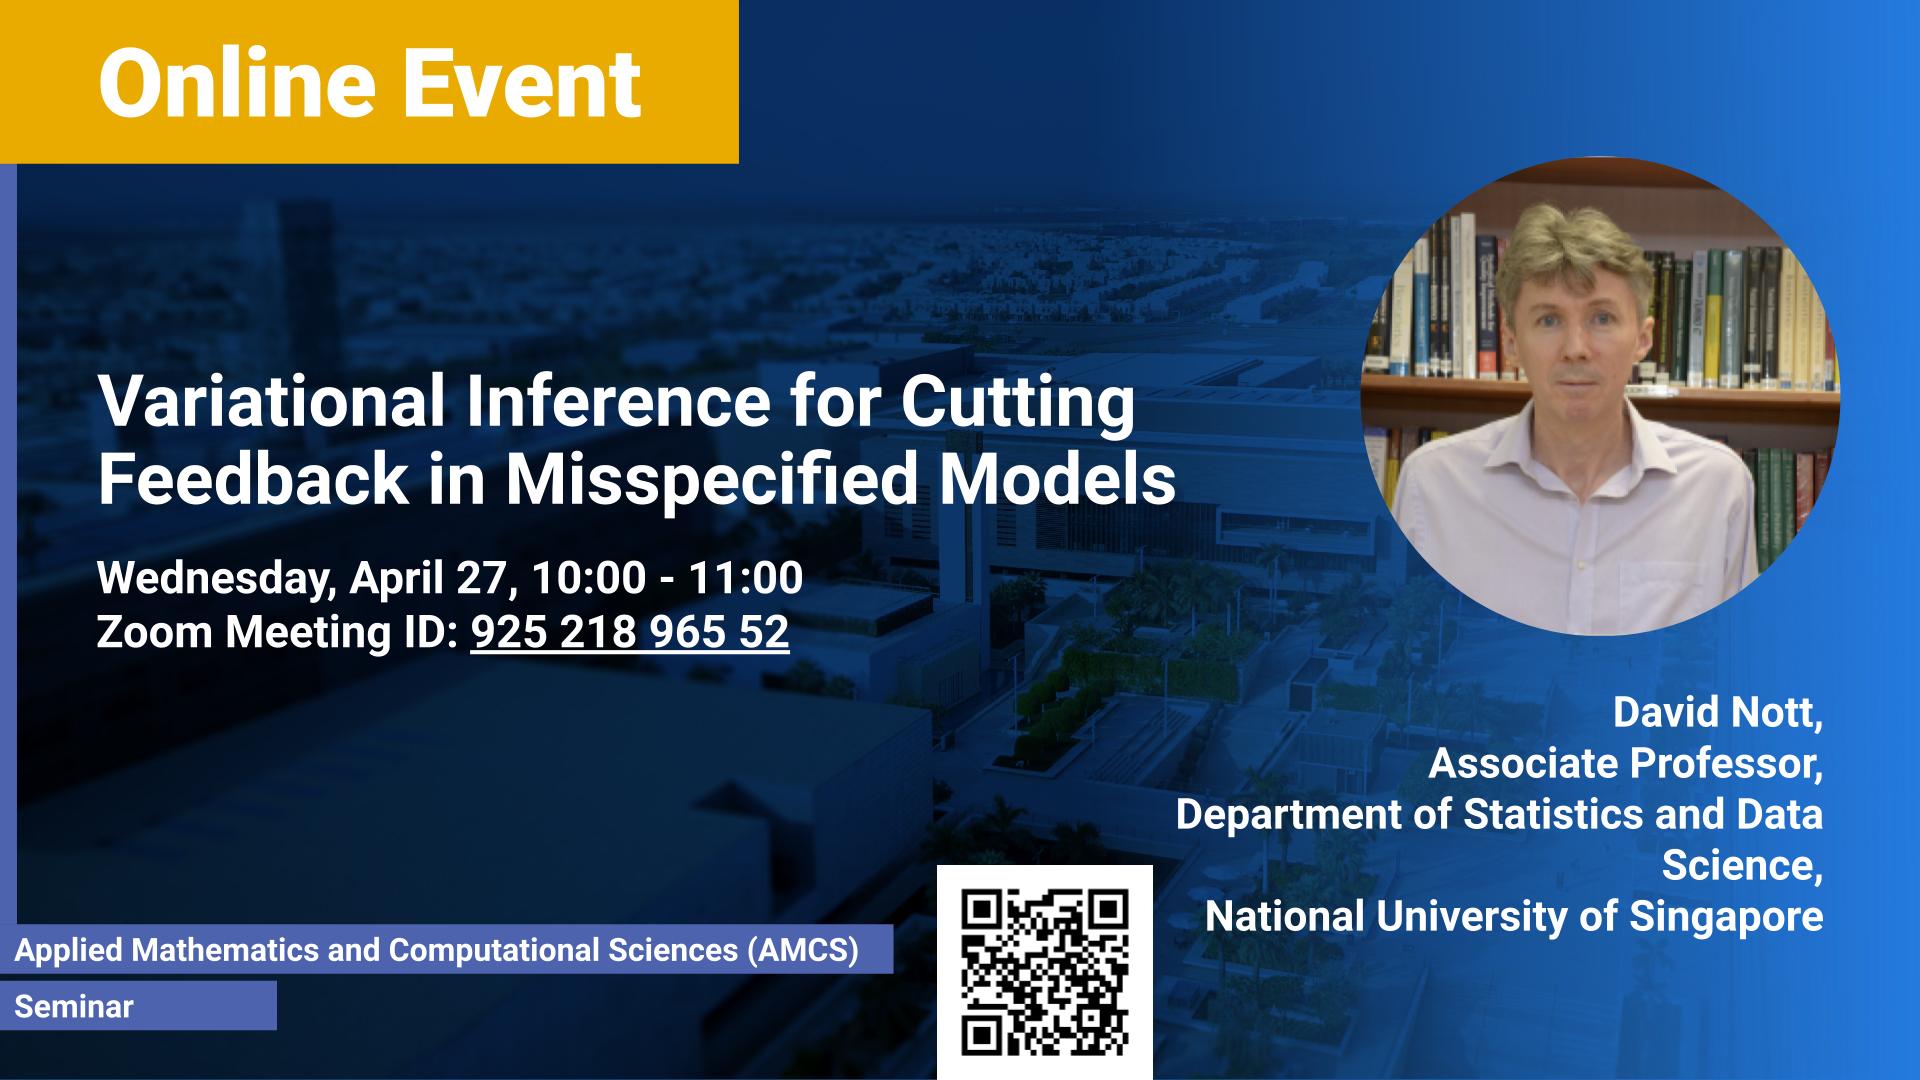 KAUST-CEMSE-AMCS-Variational-inference-for-cutting-feedback-in-misspecified-models